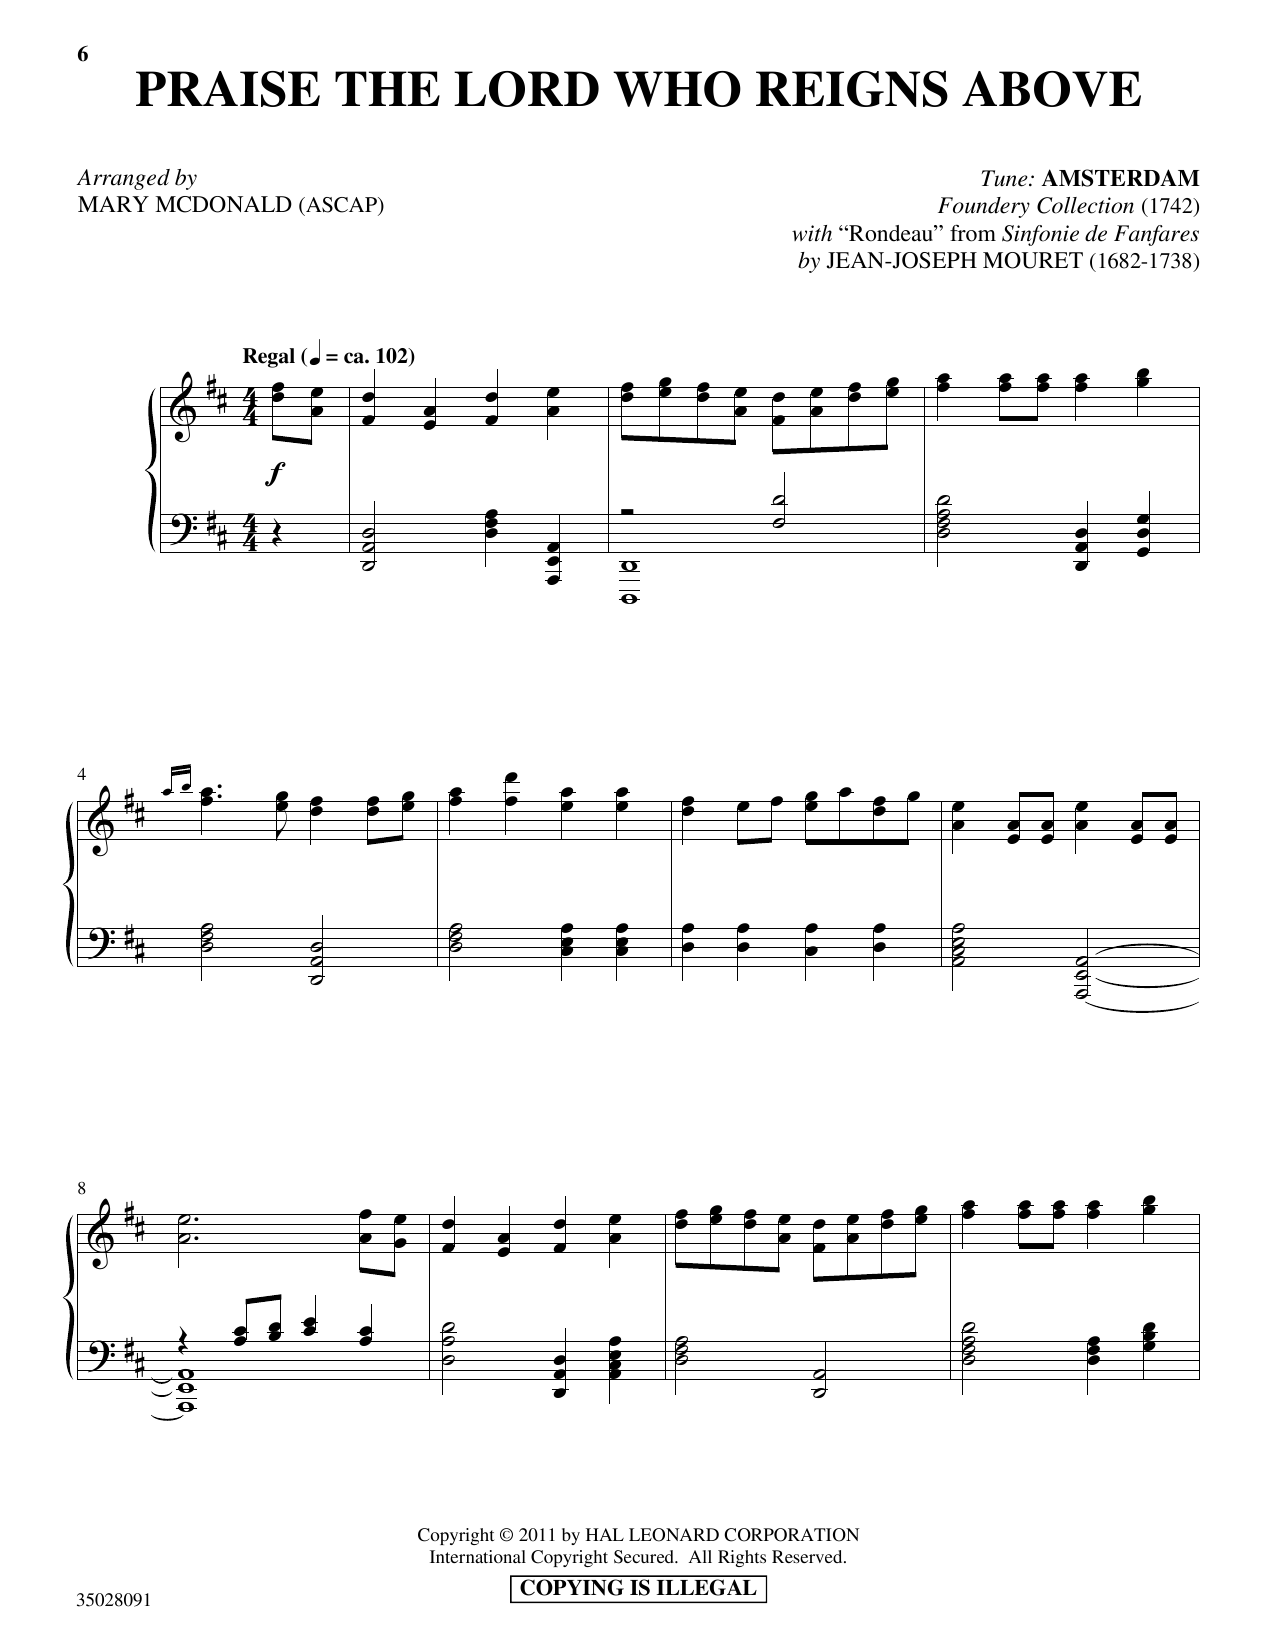 Download Foundery Collection Praise The Lord Who Reigns Above (with Sheet Music